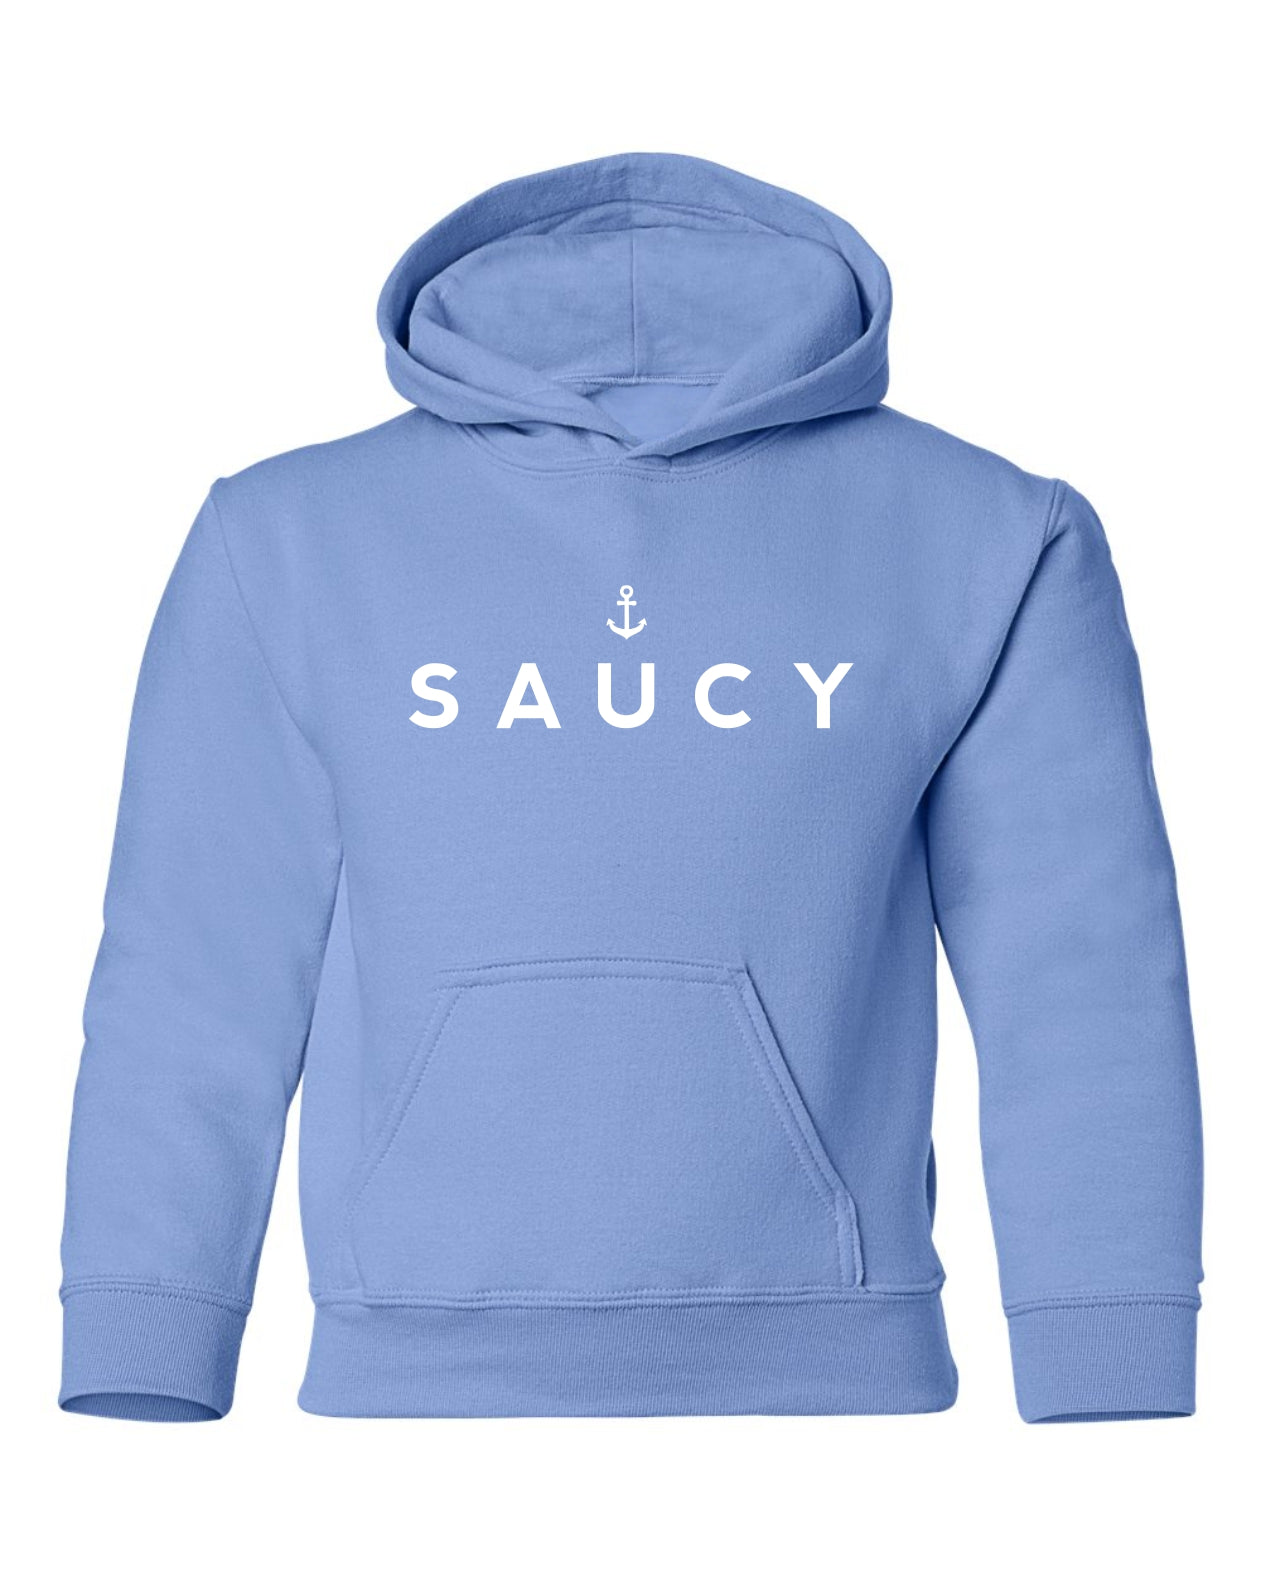 "Saucy" Youth Hoodie